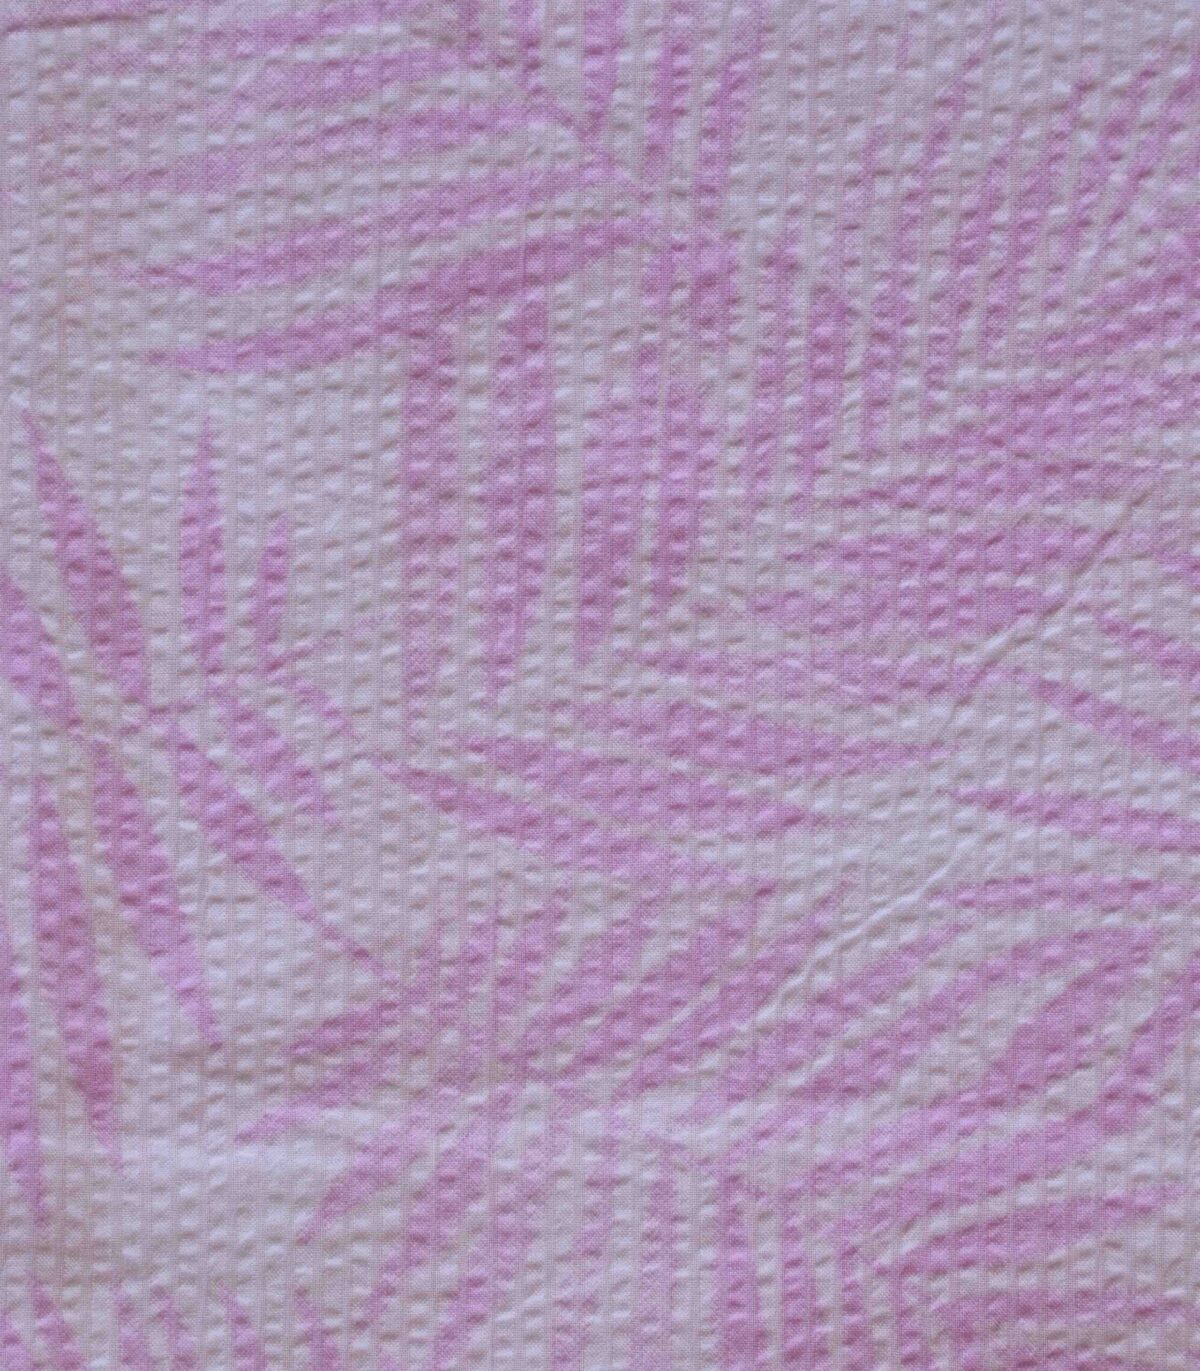 Cotton Pink Leaf Print Woven Fabric